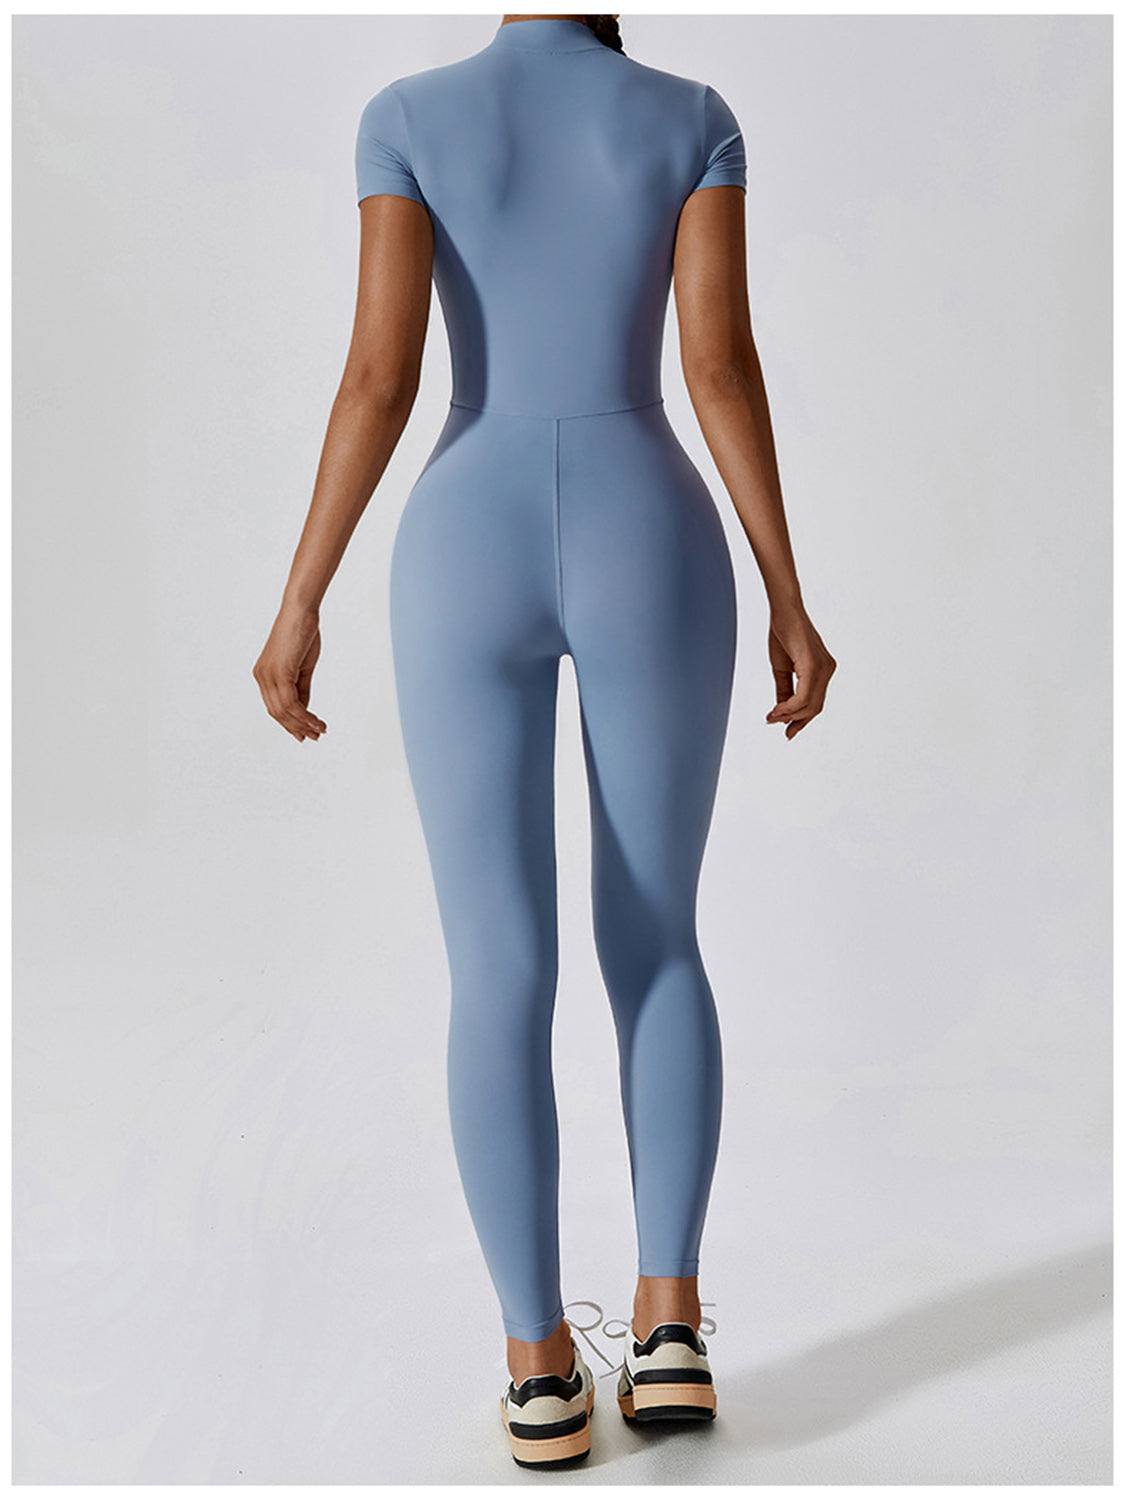 a woman in a blue bodysuit with her back to the camera